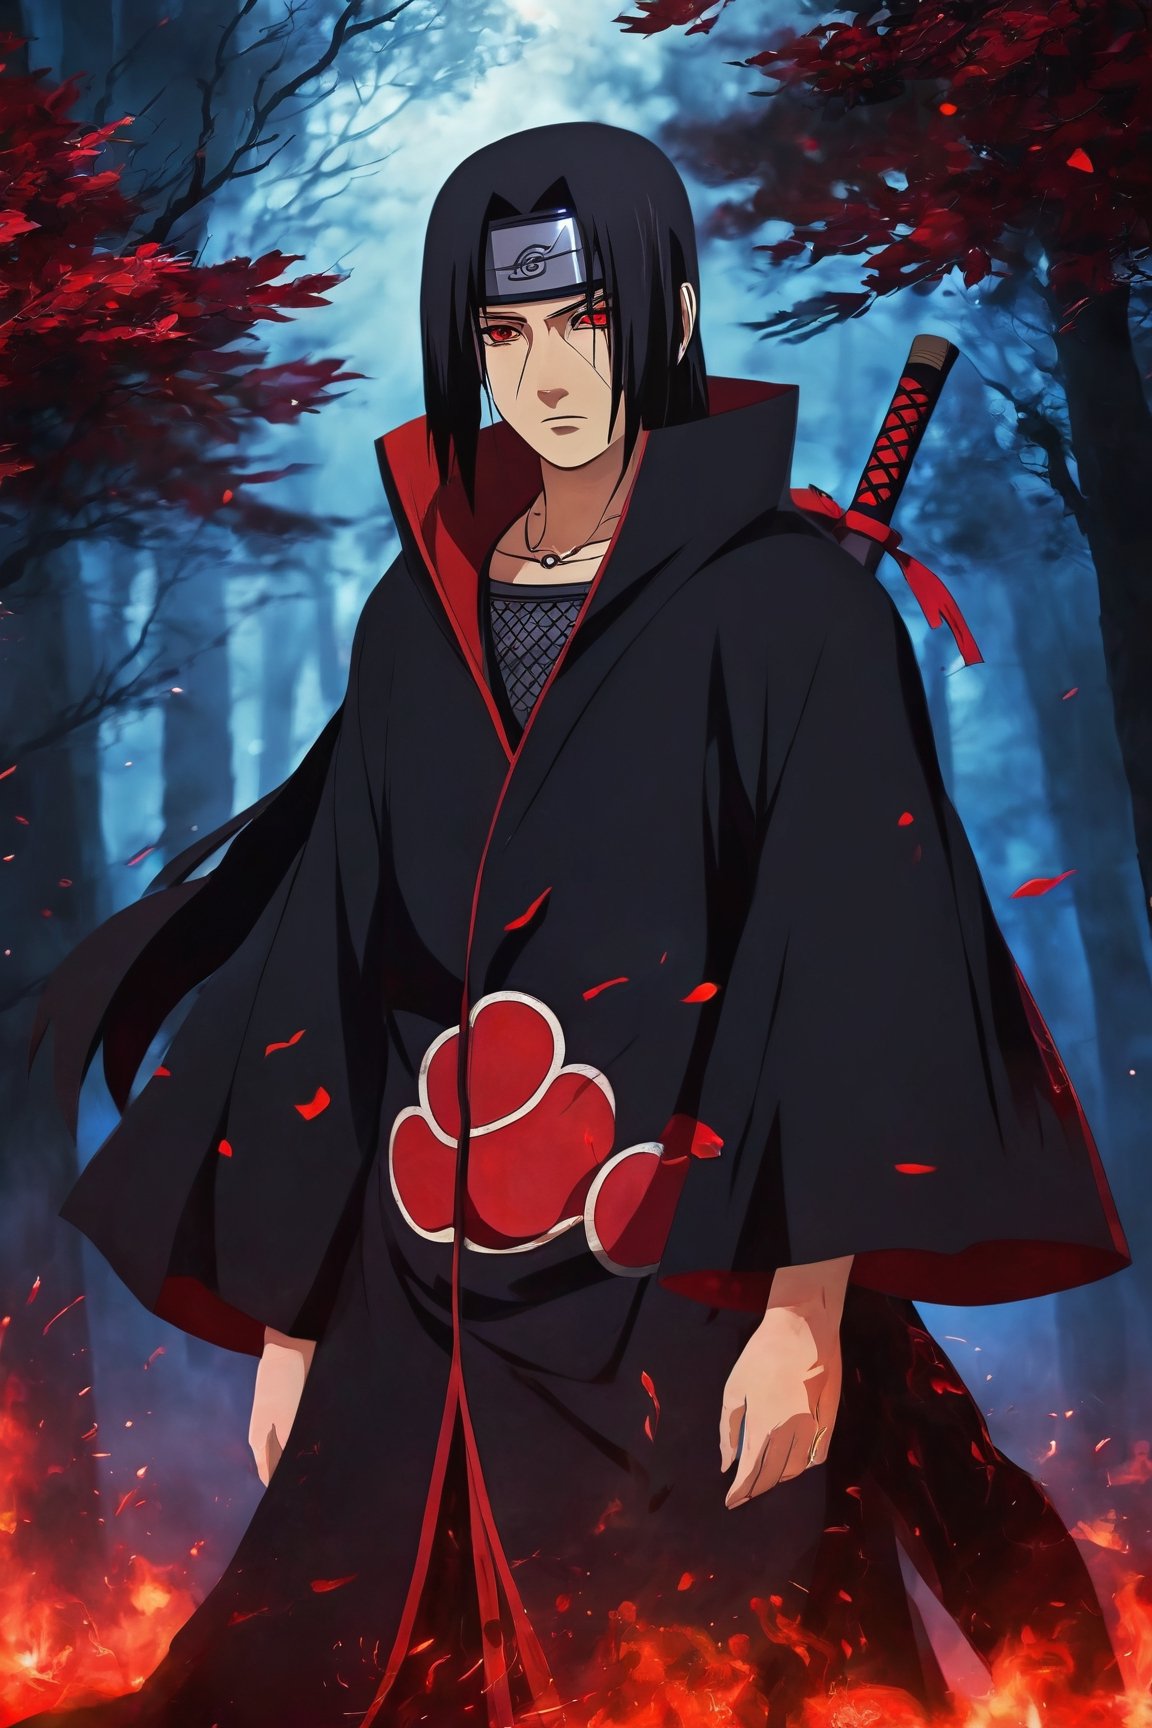 (best quality,4k,8k,highres,masterpiece:1.2),ultra-detailed,(realistic,photorealistic,photo-realistic:1.37),portrait,Itachi Uchiha,red eyes and bloodshot eyes,dark, brooding expression,black hair,headband with a leaf village symbol,pale complexion,sharingan eye,Infinite Tsukuyomi background,samurai armor,akatsuki cloak,uchiwa fan,mysterious aura,nighttime scene,vengeful and determined look,cold and calculating demeanour,subtle smoke and shadows,powerful and intense gaze,twisting and swirling black flames,moonlit sky,eye-catching contrast of light and darkness,sharp and defined facial features,piercing gaze,faint smirk,blood splatters on the face,ominous and menacing atmosphere,exquisite detailing,meticulously rendered textures,subtle variations of light and shadow,impressive artistry,realistically portrayed emotions,vivid and saturated colors,dramatic and dynamic composition,hint of magical energy,background filled with dark clouds and lightning,attention to minute details,skilled use of light and reflection,depth and dimensionality to the image,impressive rendering of Itachi's attire and accessories,perfect replication of Itachi's unique appearance,convincing portrayal of his strong personality.